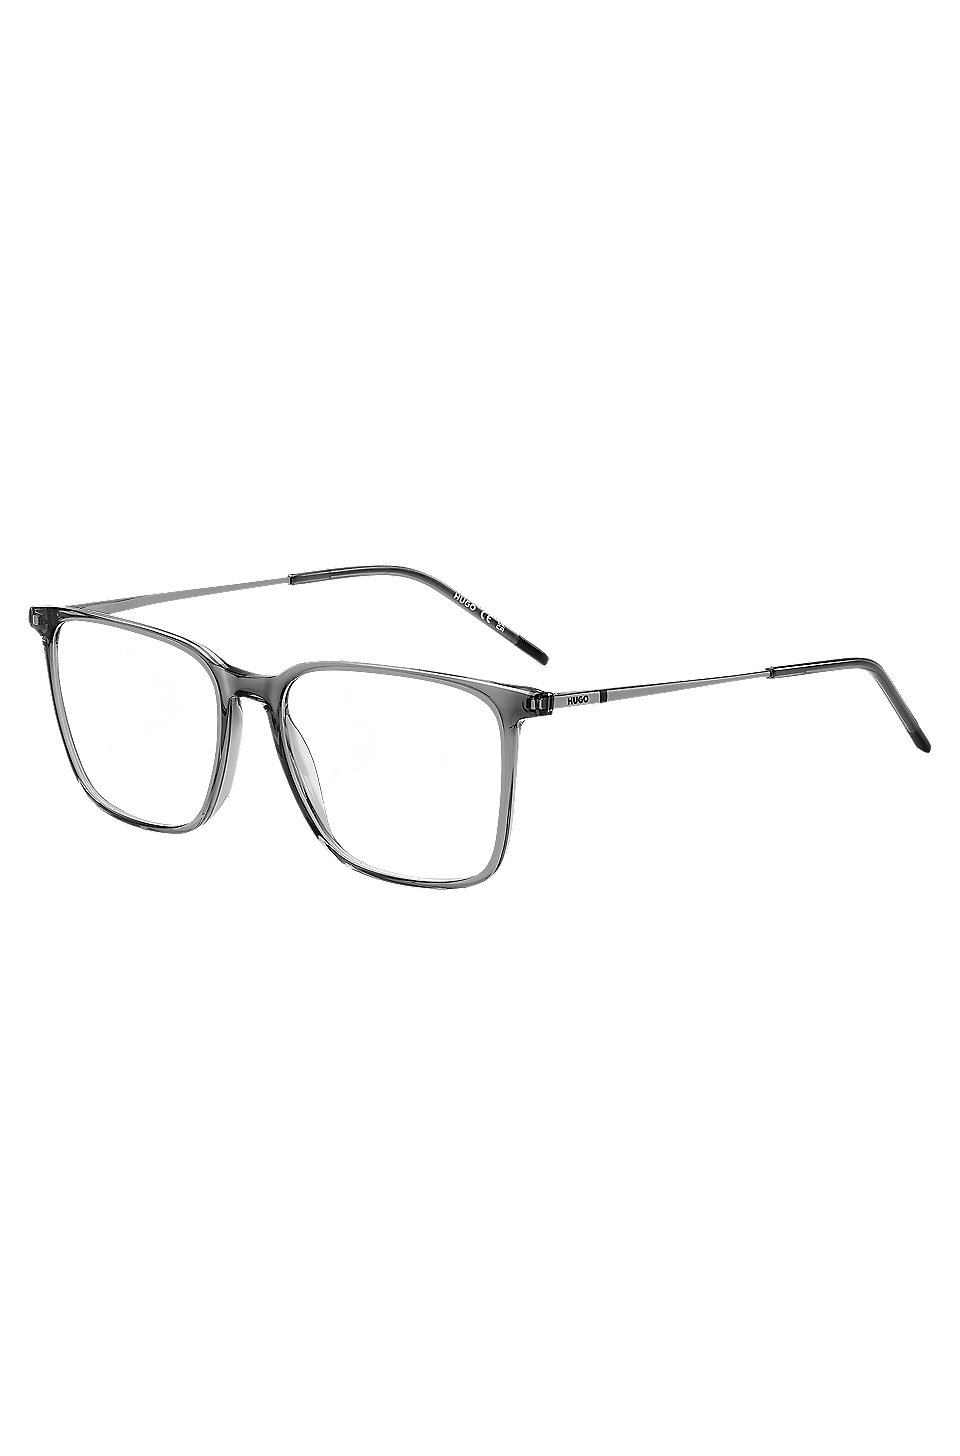 HUGO - Optical frames in transparent grey acetate with metal temples